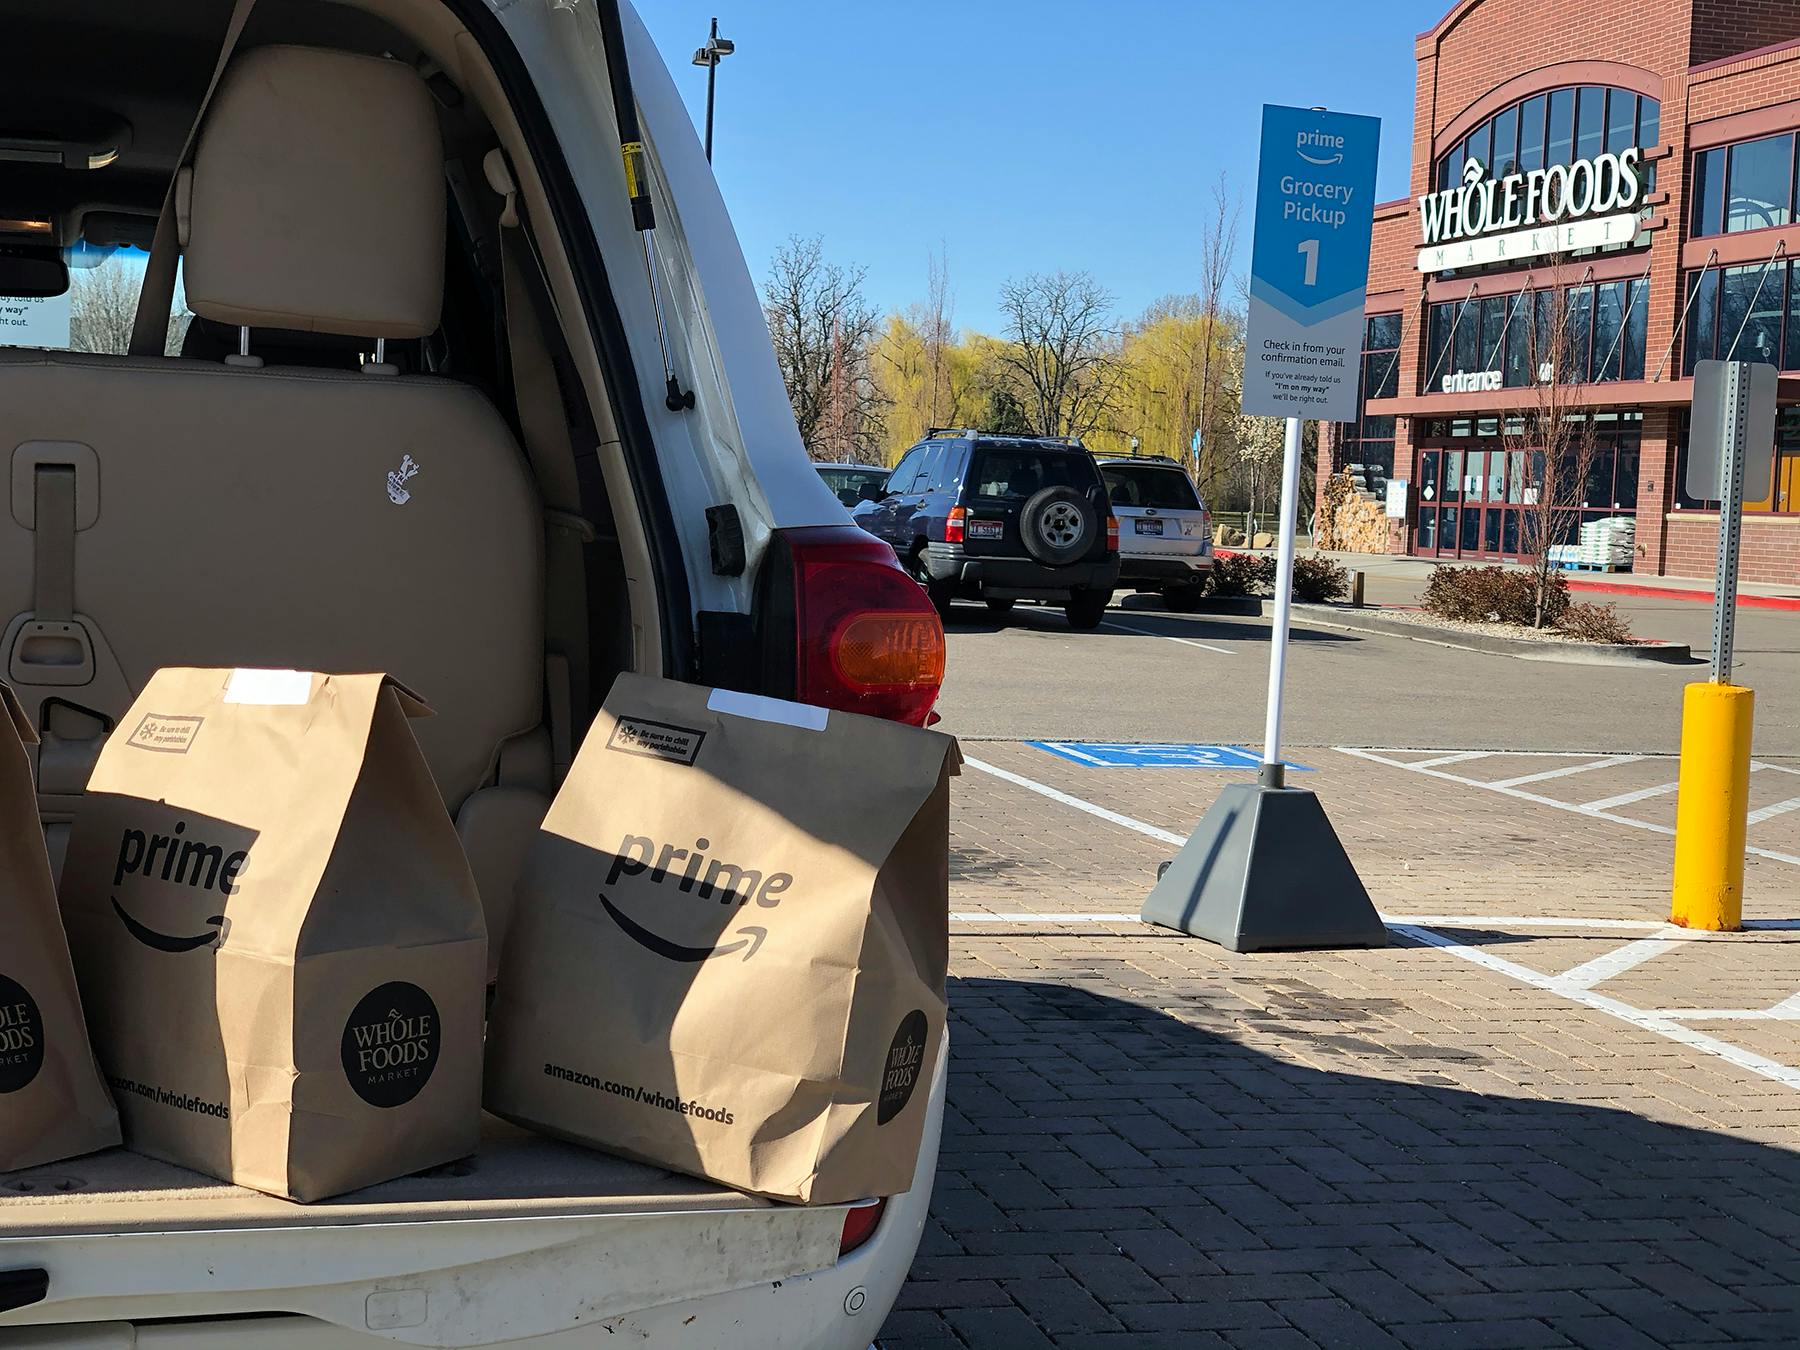 Brown grocery bags in the trunk of an SUV parked in front of Whole Foods.